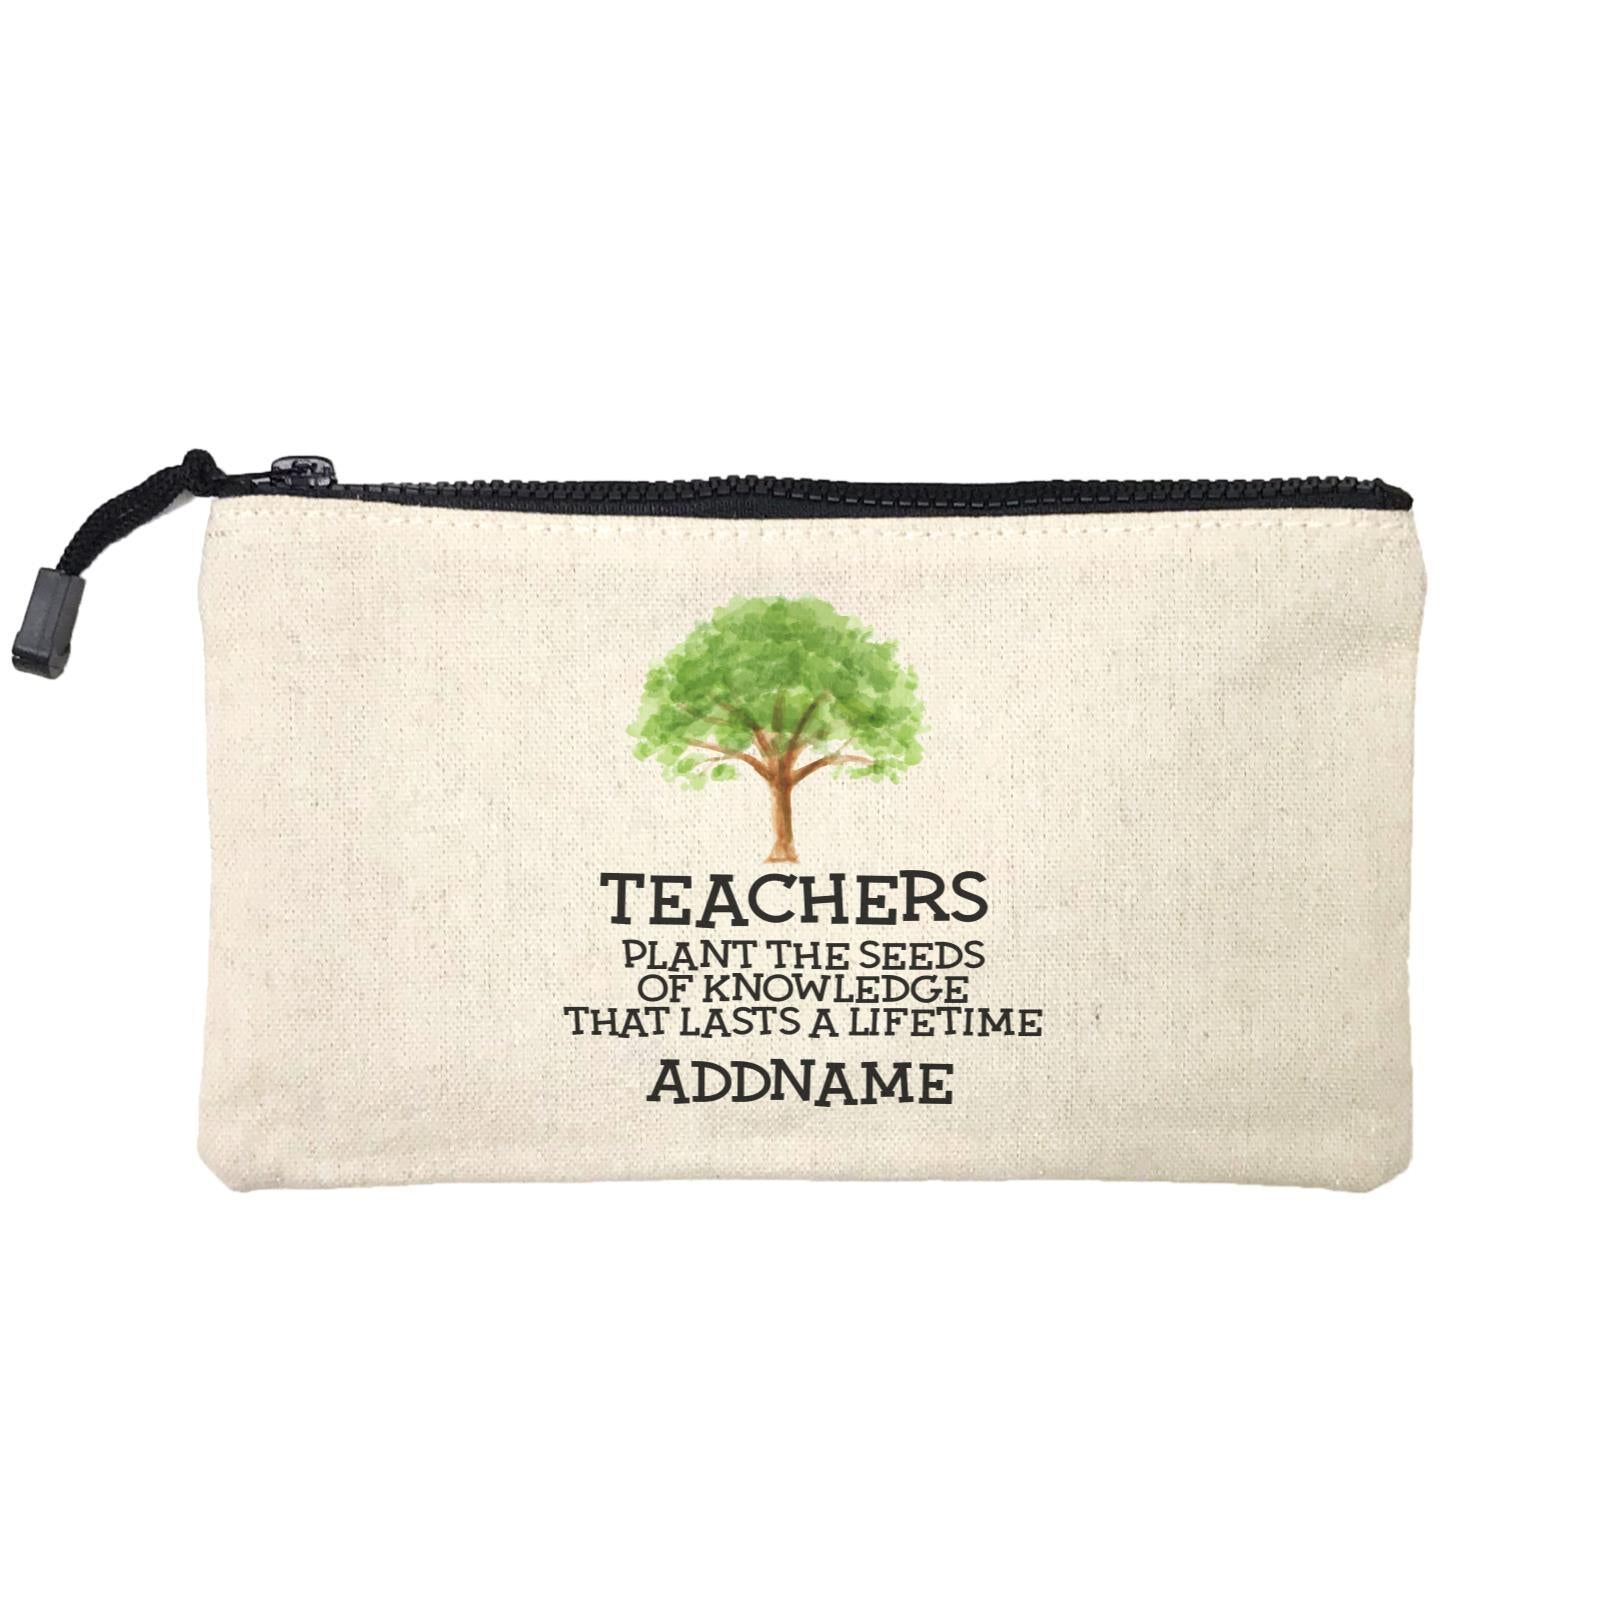 Teacher Quotes 2 Teachers Plant The Seeds Of Knowledge That Lasts A Lifetime Addname Mini Accessories Stationery Pouch